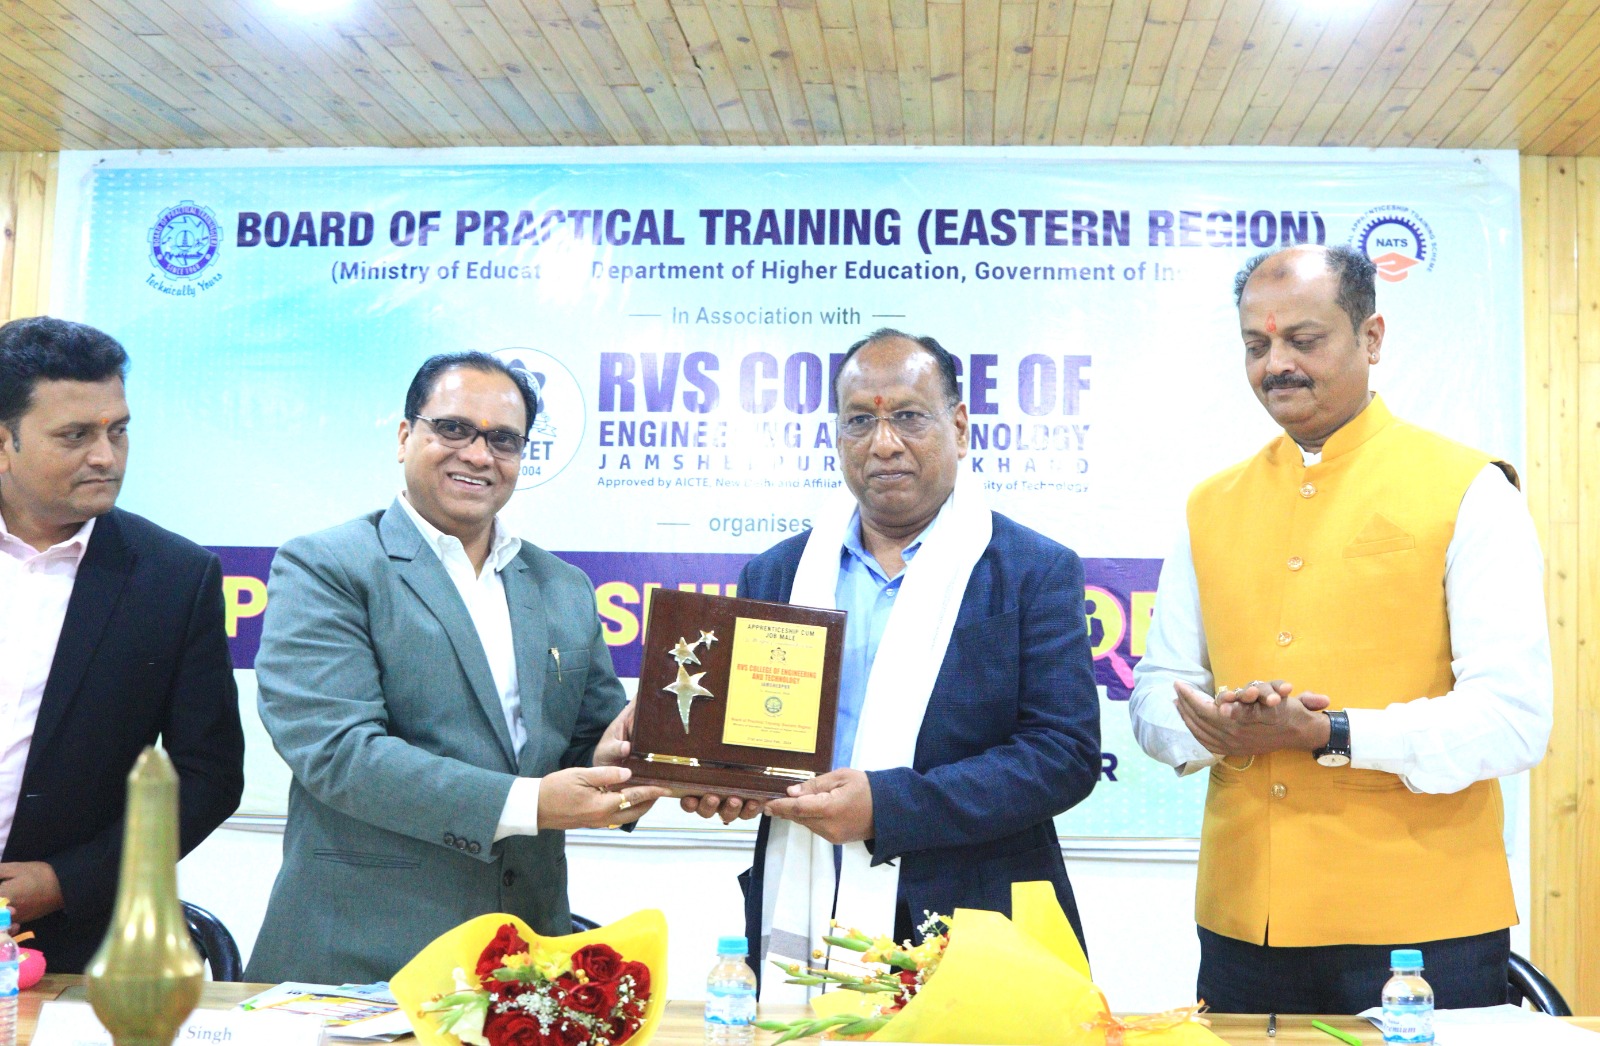 “Empowering Futures: RVS College of Engineering and Technology Hosts Two-Day Employment Fair in Collaboration with the Board of Practical Training”